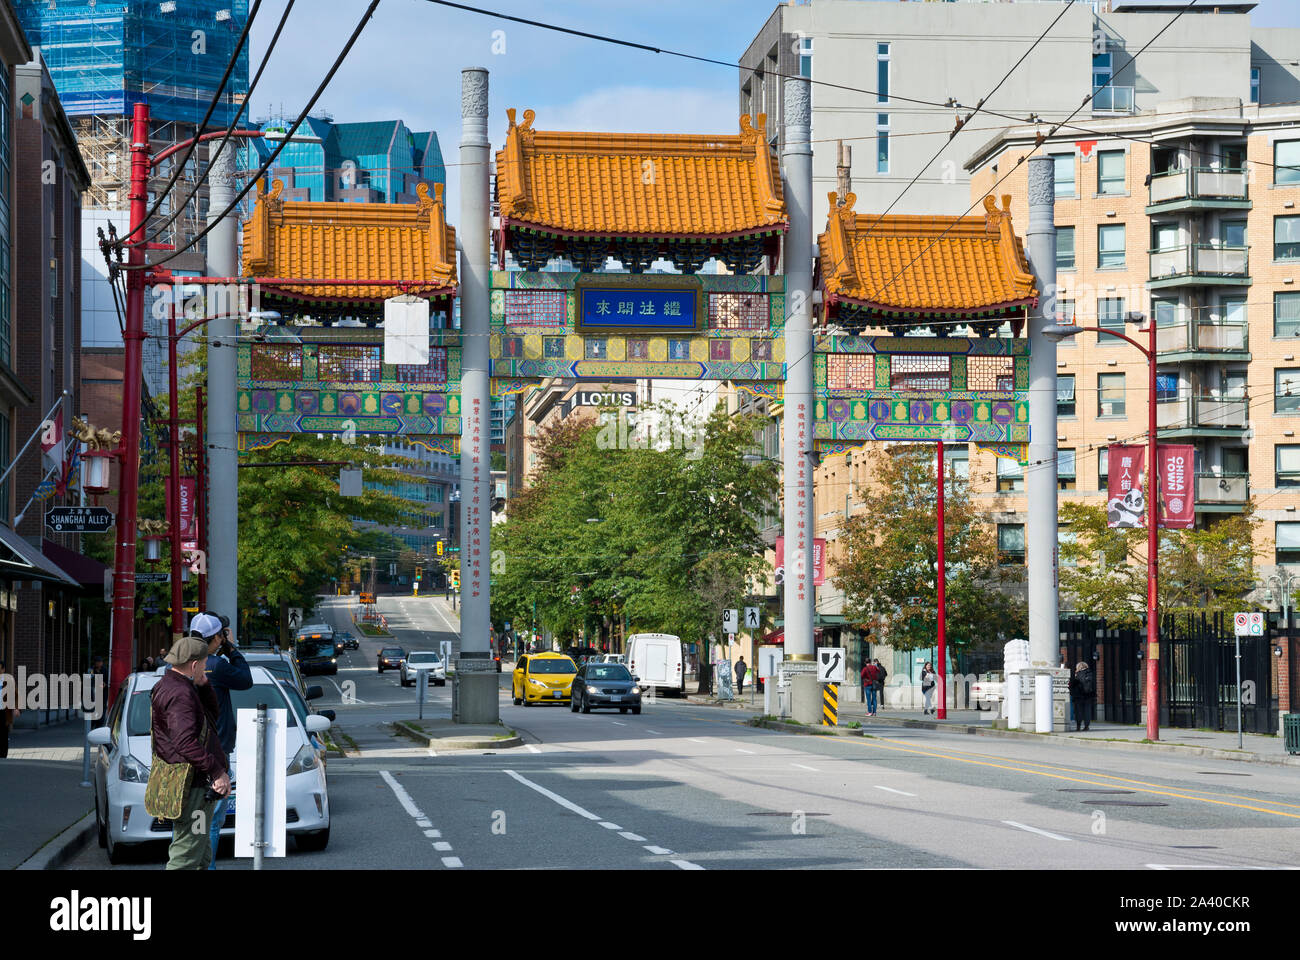 Millennium Gate in Vancouver BC Chinatown in the Autumn 2019. Street scene is Chinatown, Vancouver Canada. Stock Photo